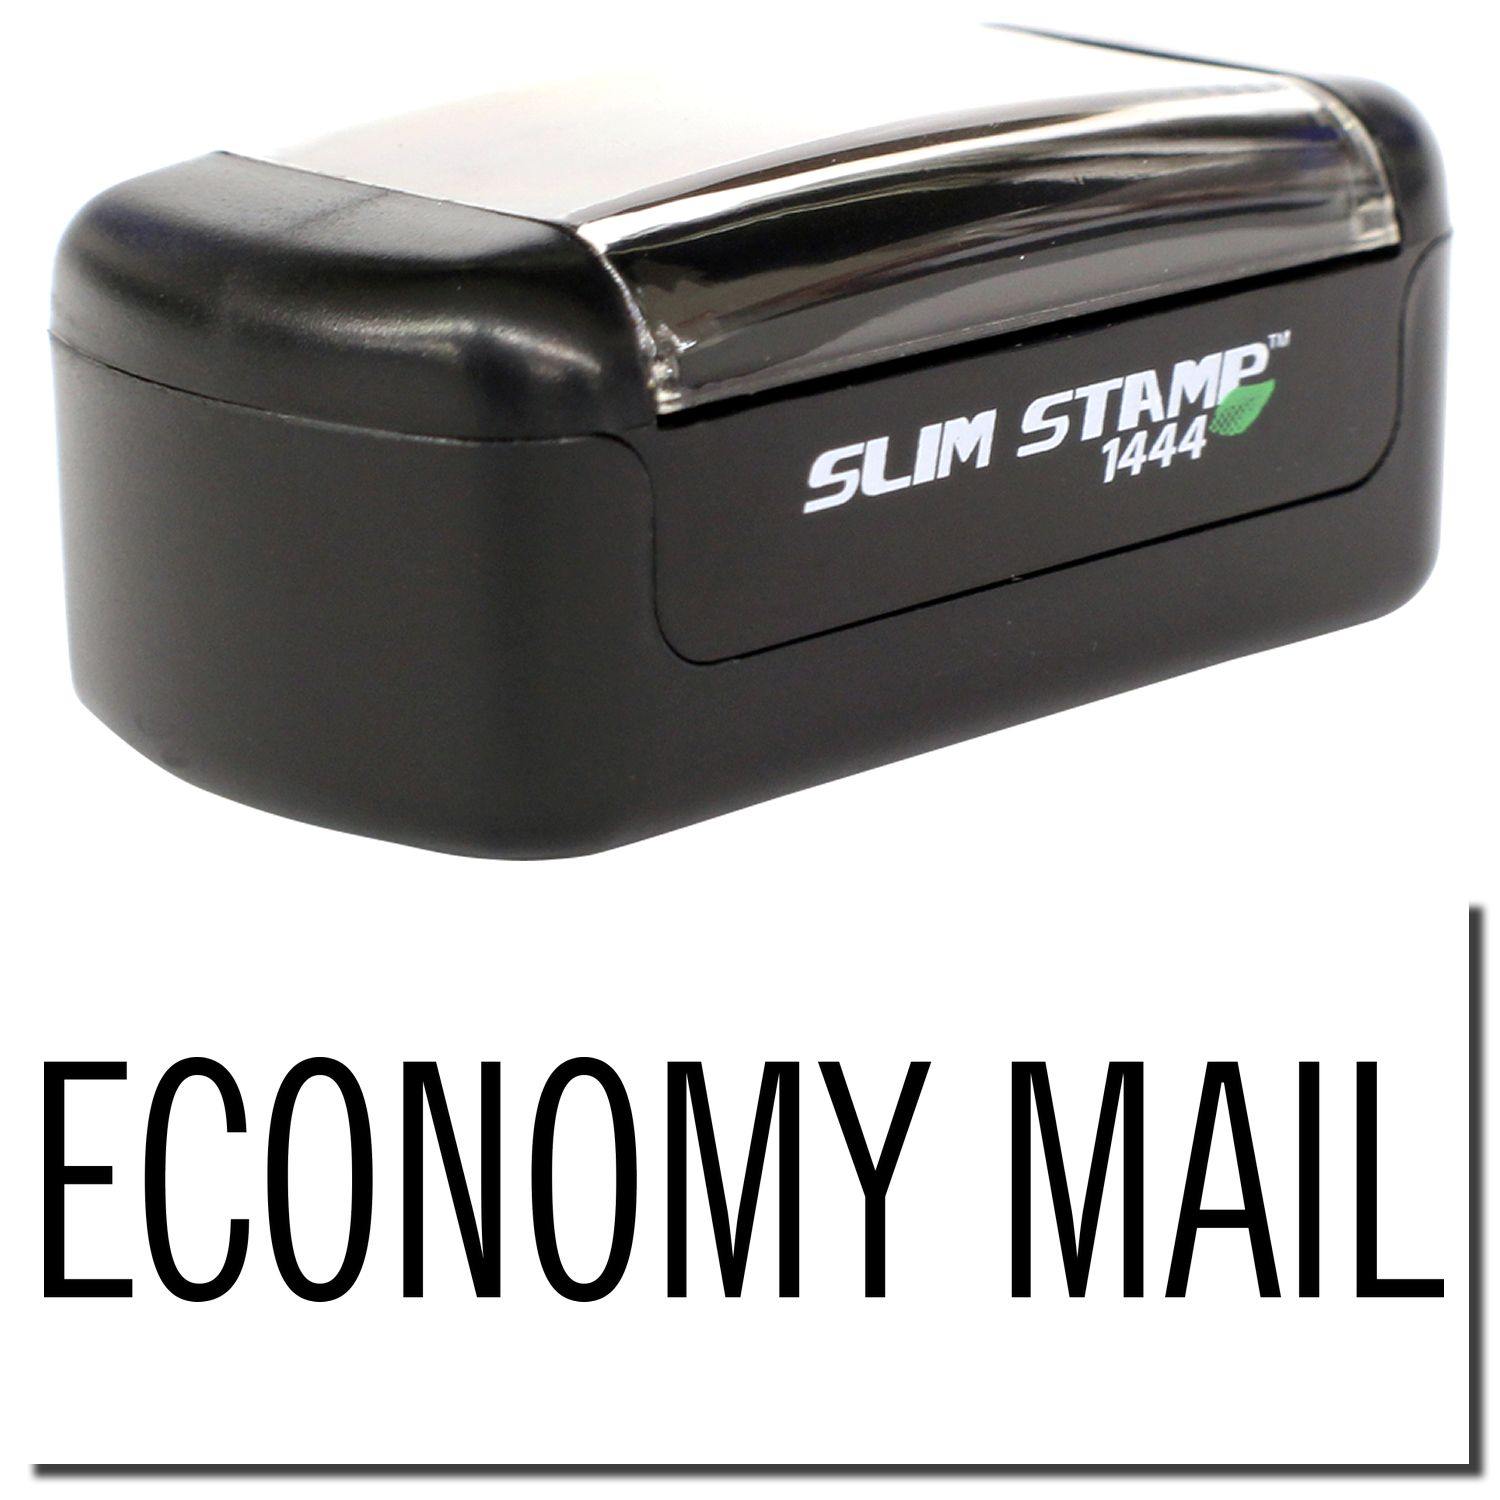 A stock office pre-inked stamp with a stamped image showing how the text "ECONOMY MAIL" is displayed after stamping.